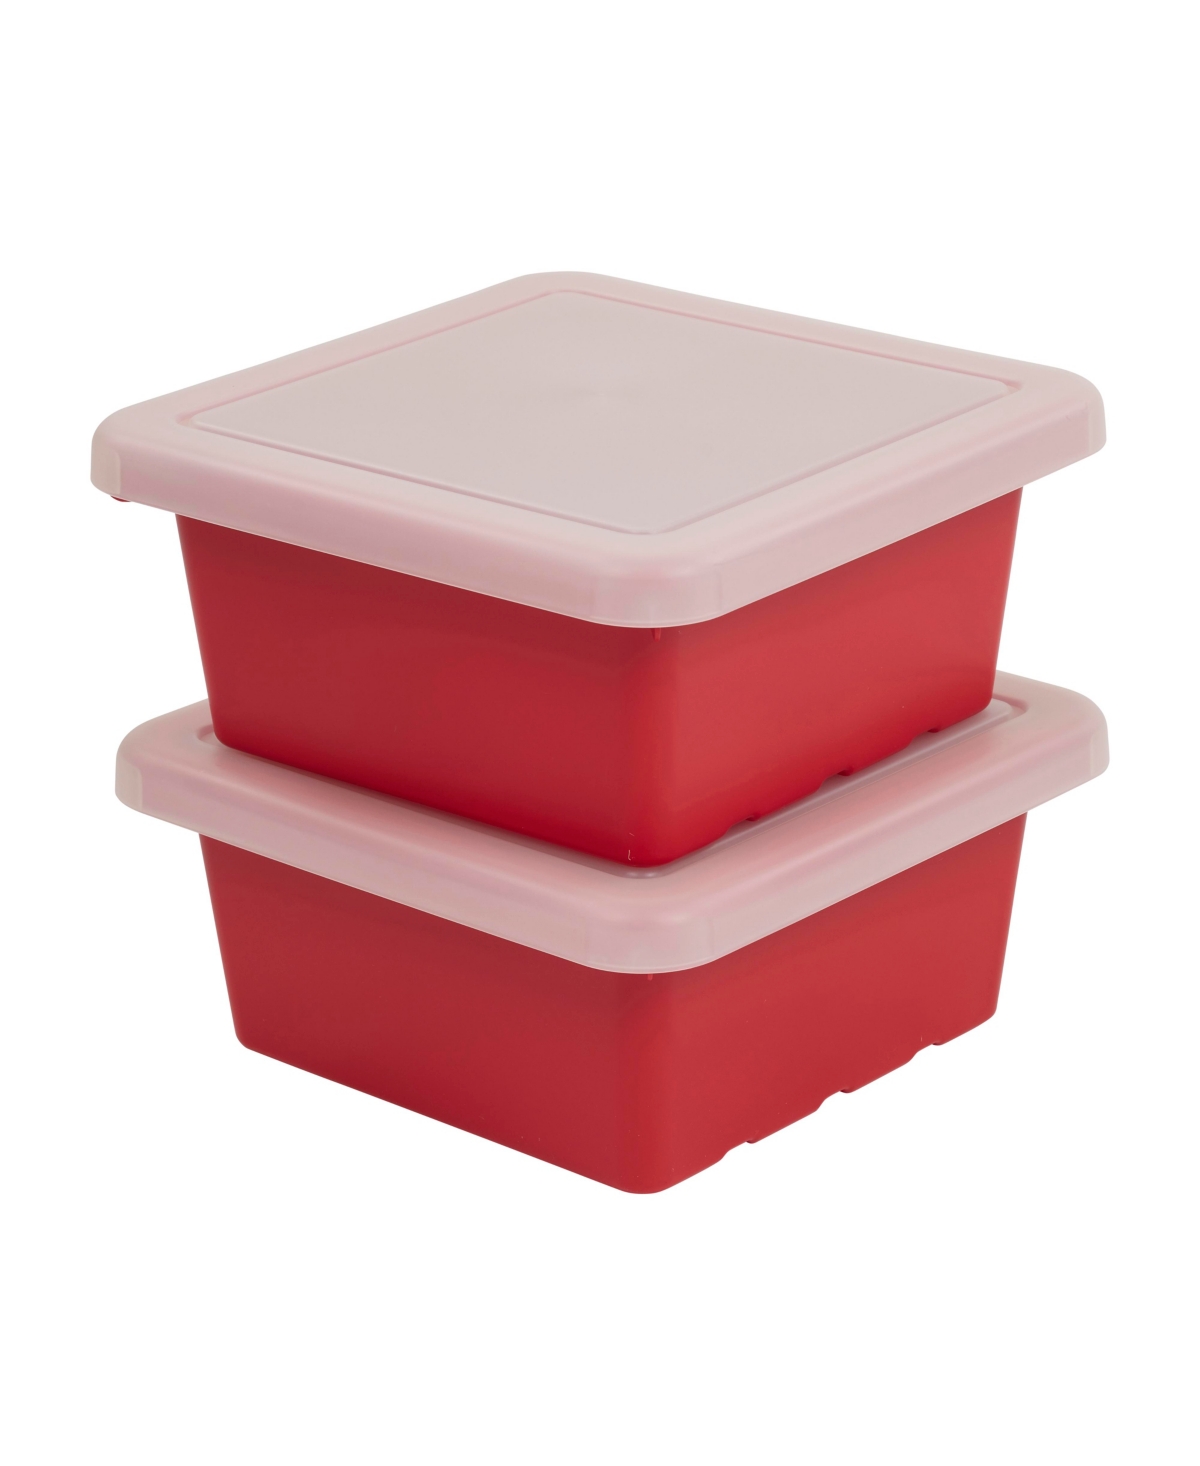 Square Bin with Lid, Blue, 2-Pack - Red